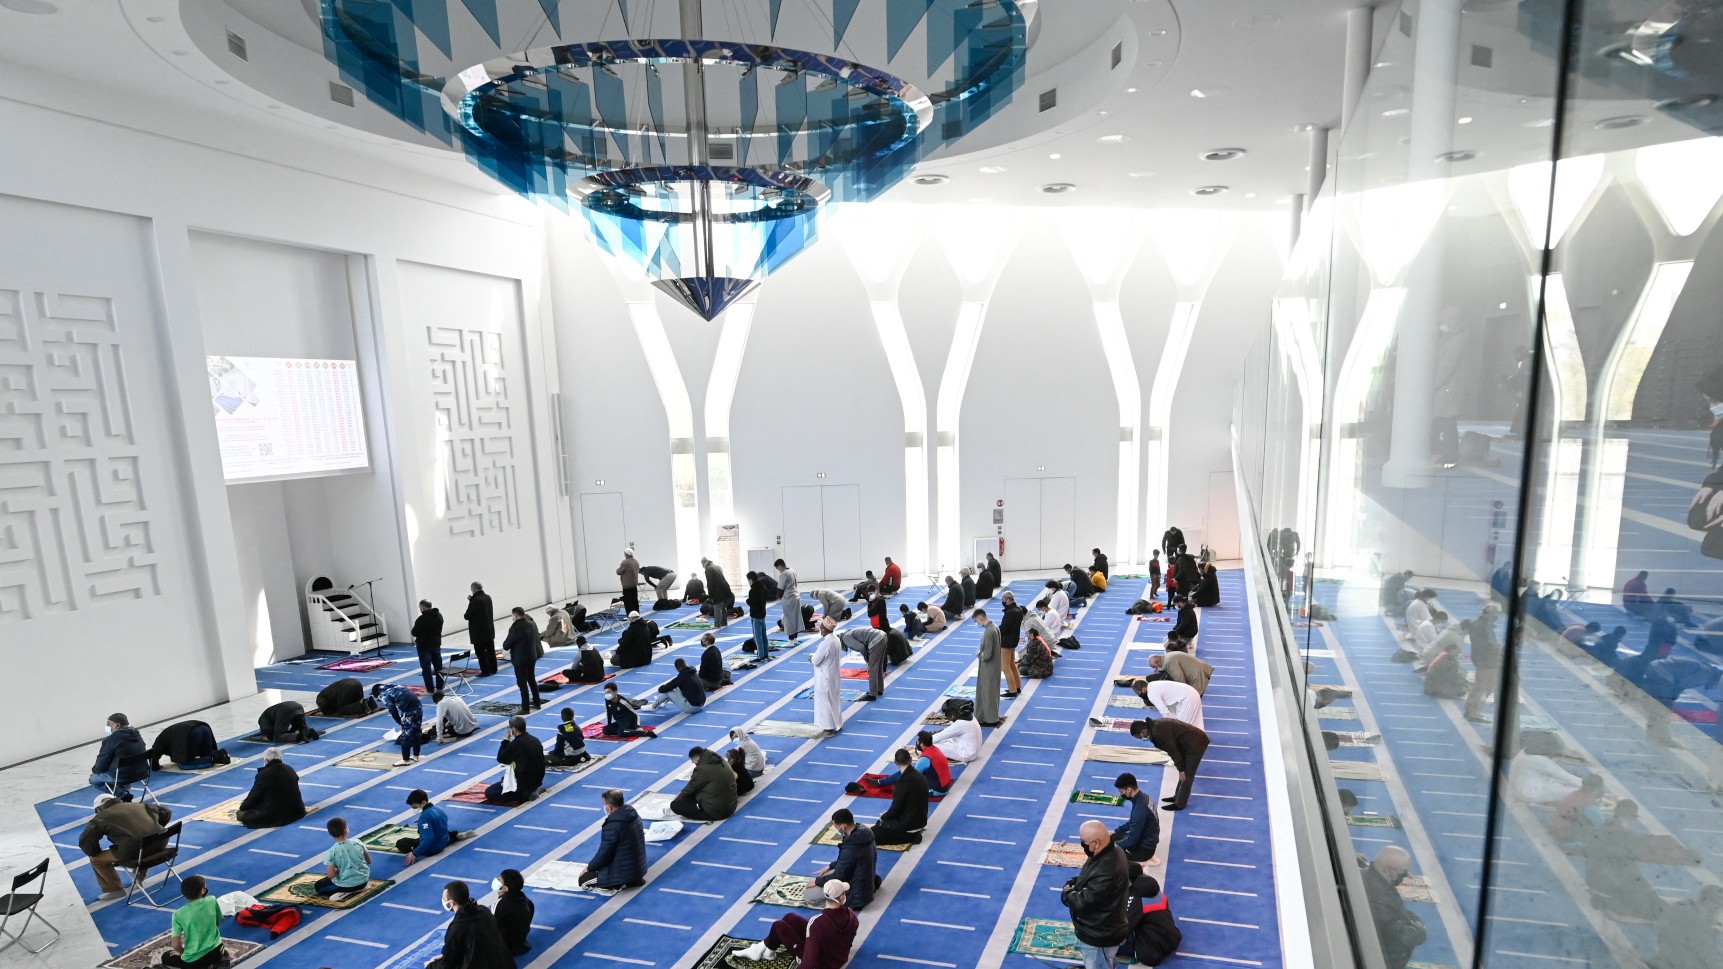 Muslim worshippers pray on the first day of the holy month of Ramadan on April 13, 2021